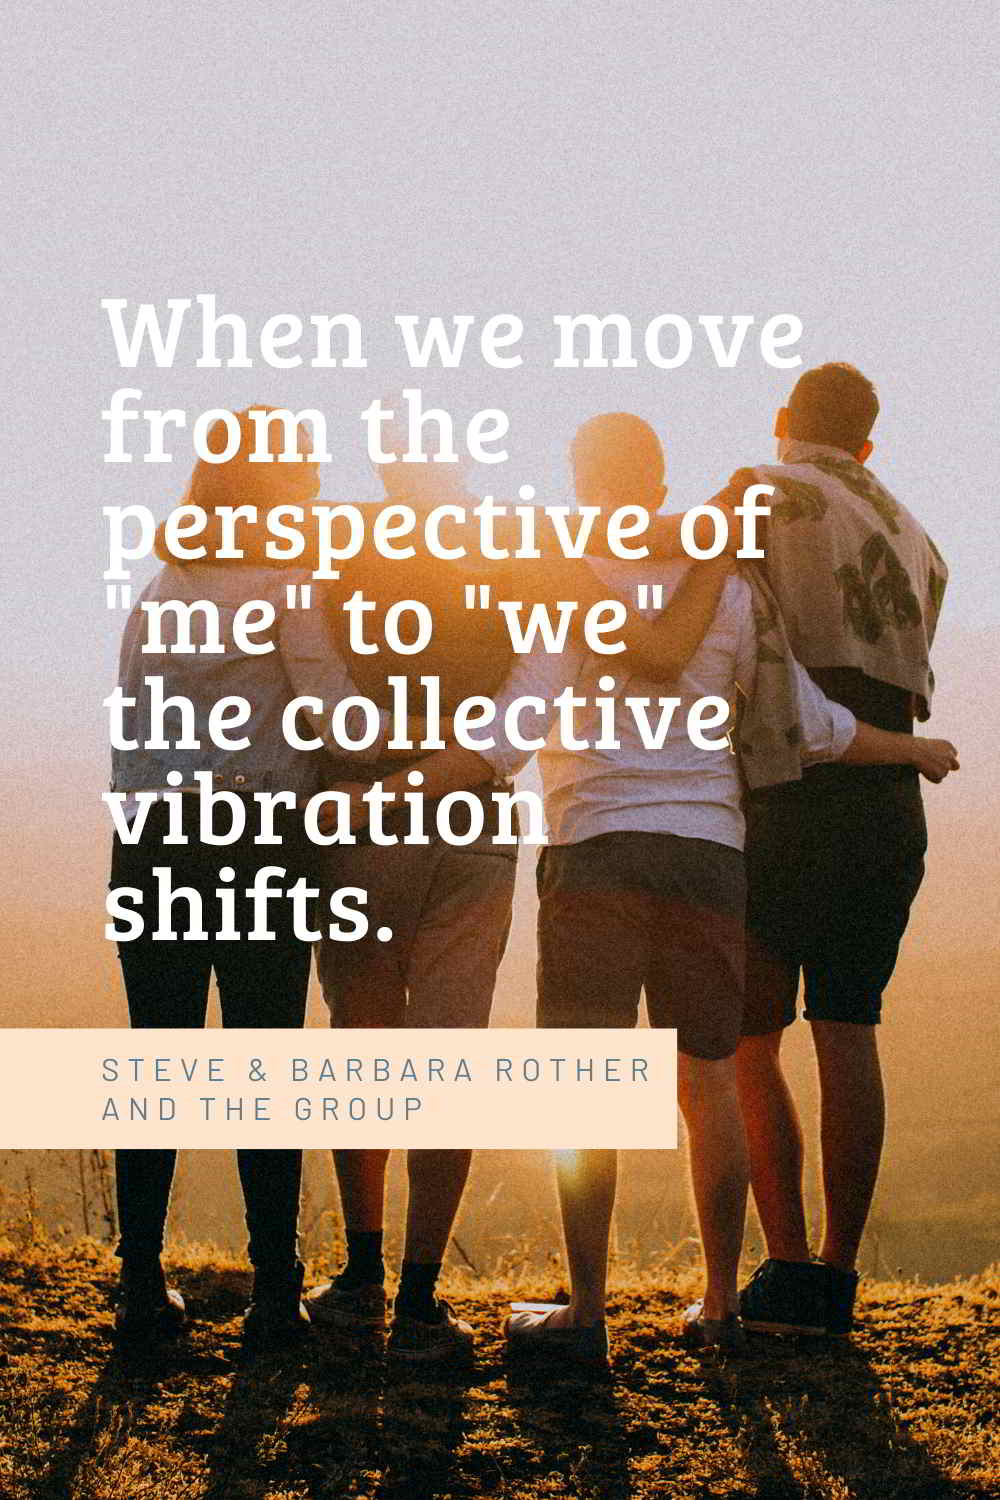 When we move from the perspective of "me" to "we" the collective vibration shifts